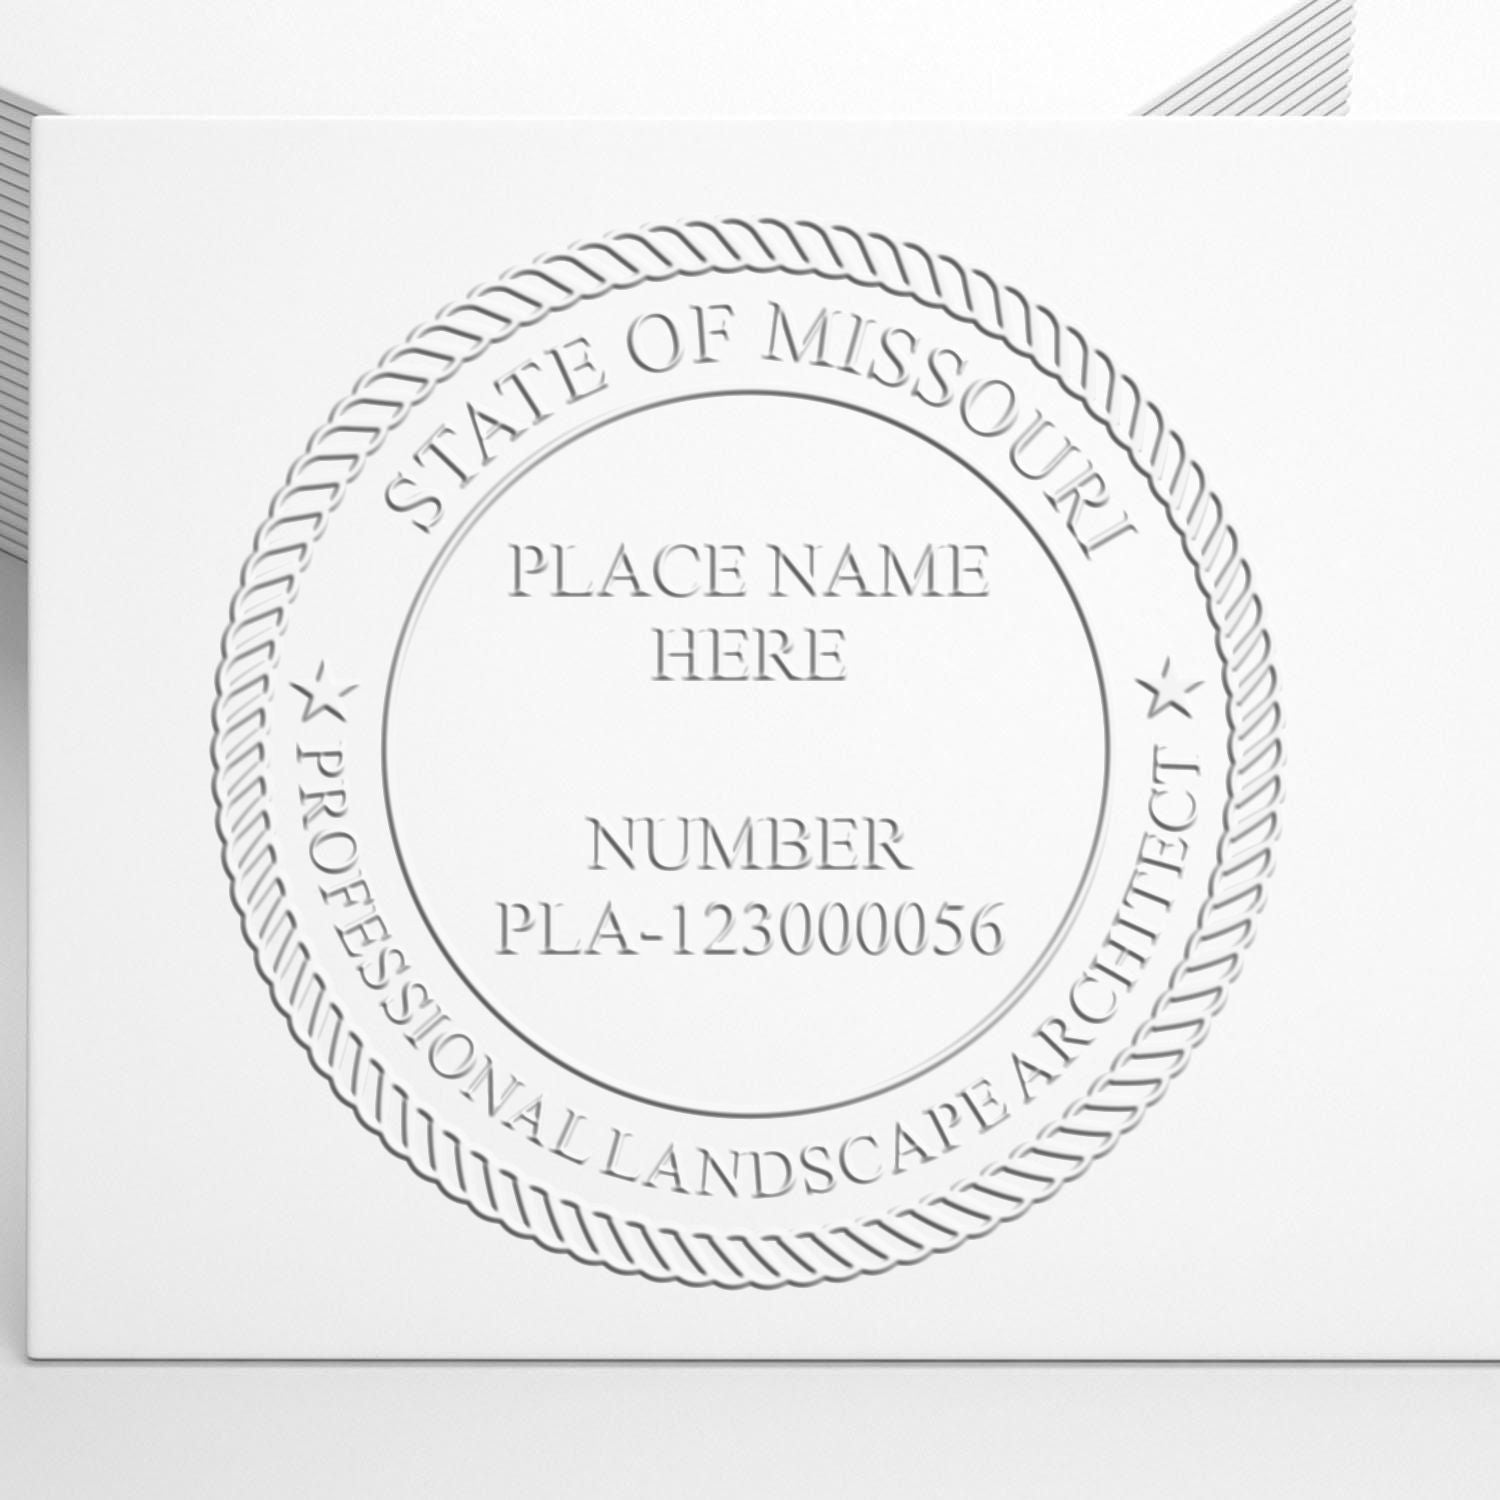 A stamped imprint of the Gift Missouri Landscape Architect Seal in this stylish lifestyle photo, setting the tone for a unique and personalized product.